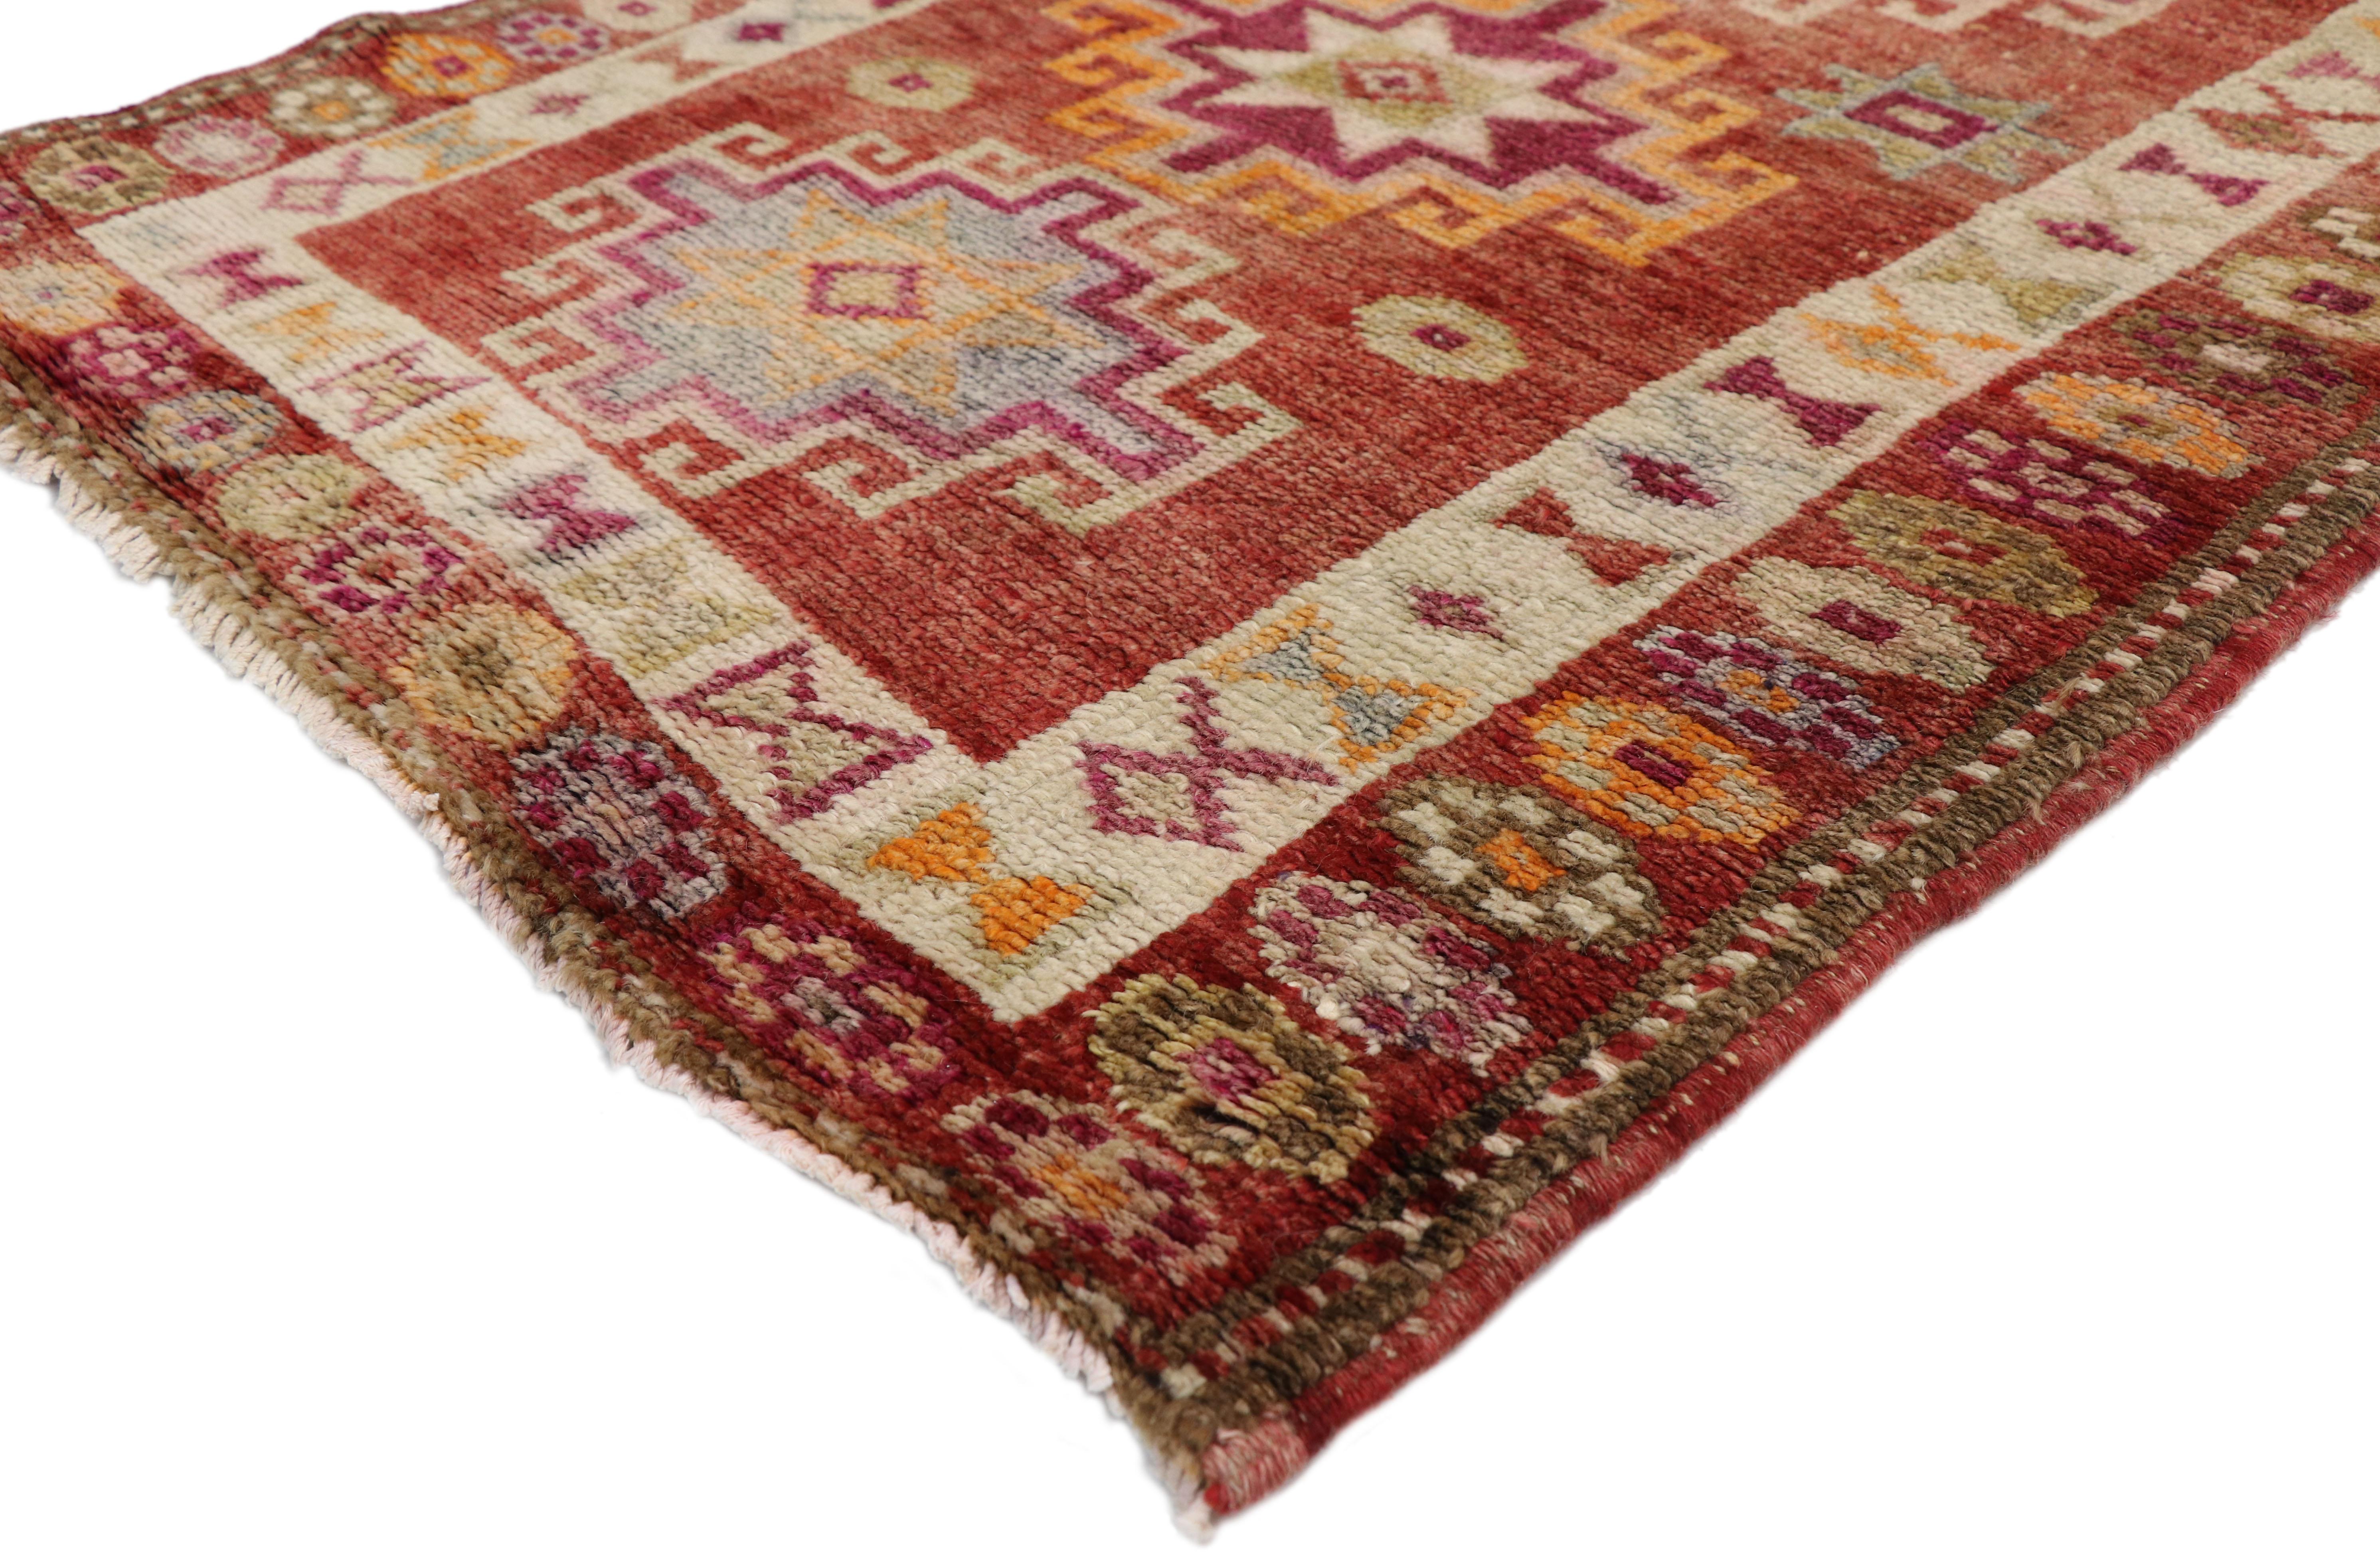 52047 Vintage Turkish Oushak Runner with Mid-Century Modern Art Deco Style. With its bold geometric pattern and rectilinear architectural elements, this hand-knotted wool vintage Turkish Oushak runner embodies Mid-Century Modern style with an Art